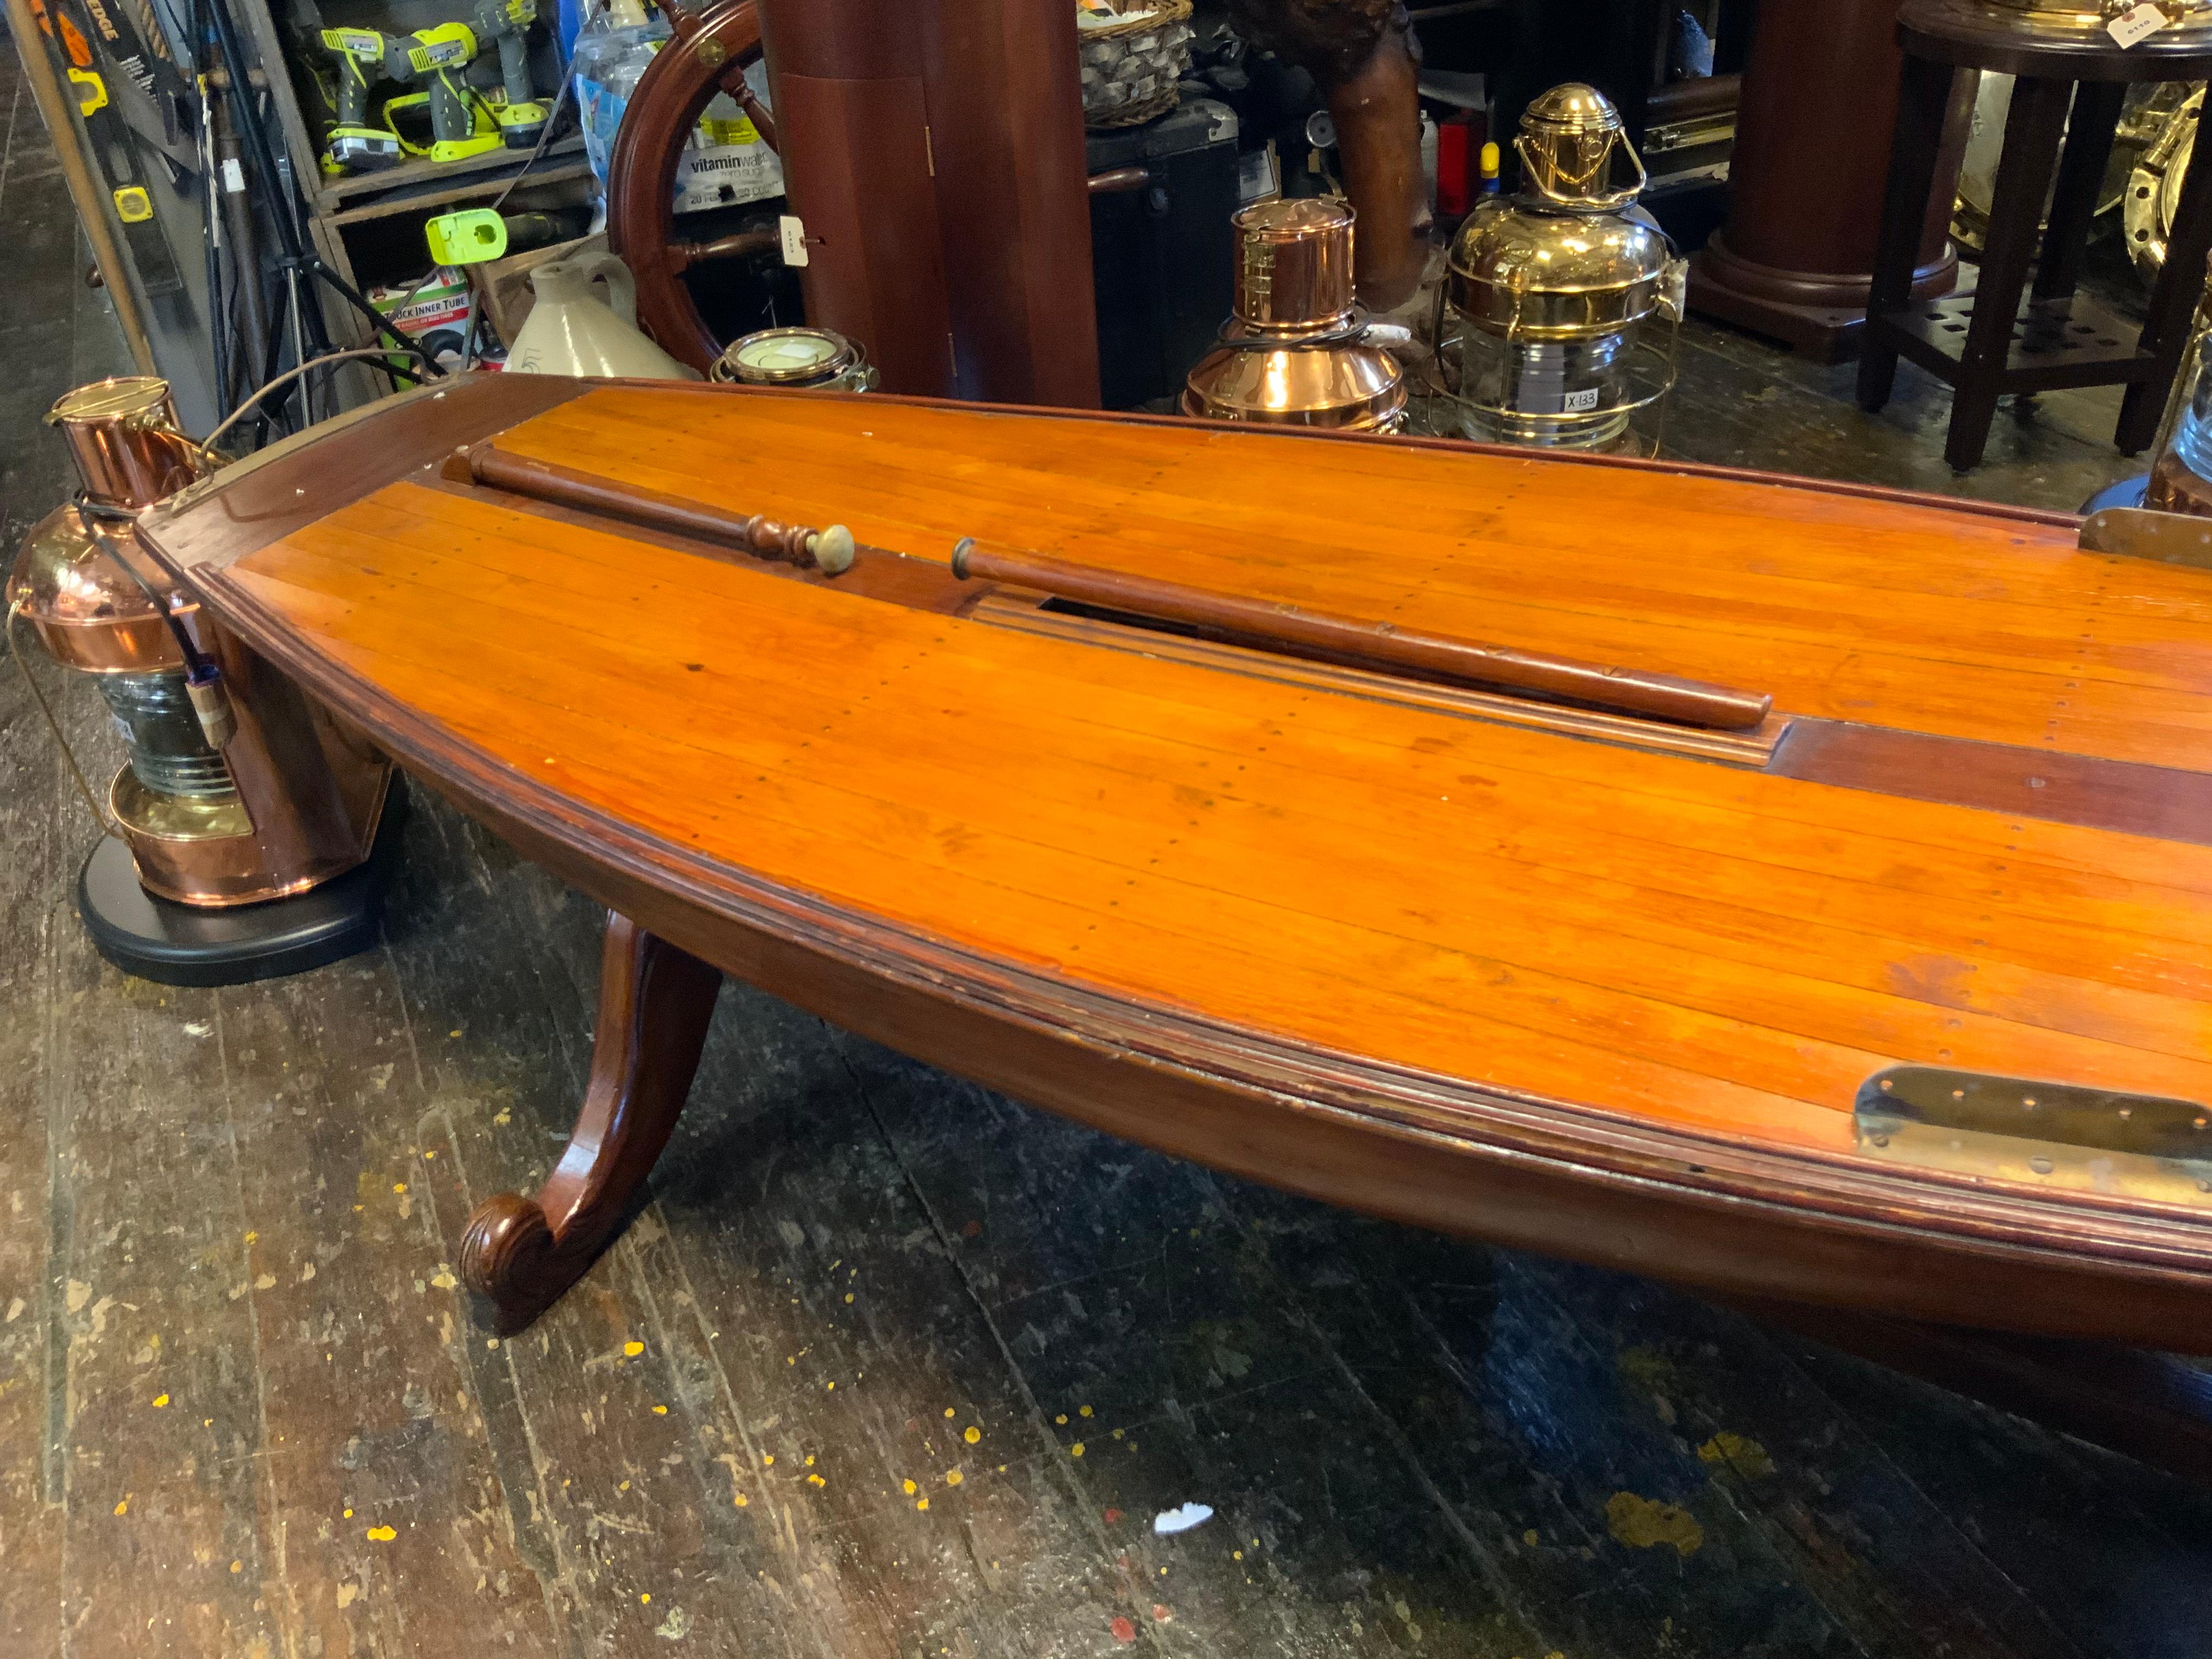 Late 19th Century Ten Foot Yacht Table from Nineteenth Century Model